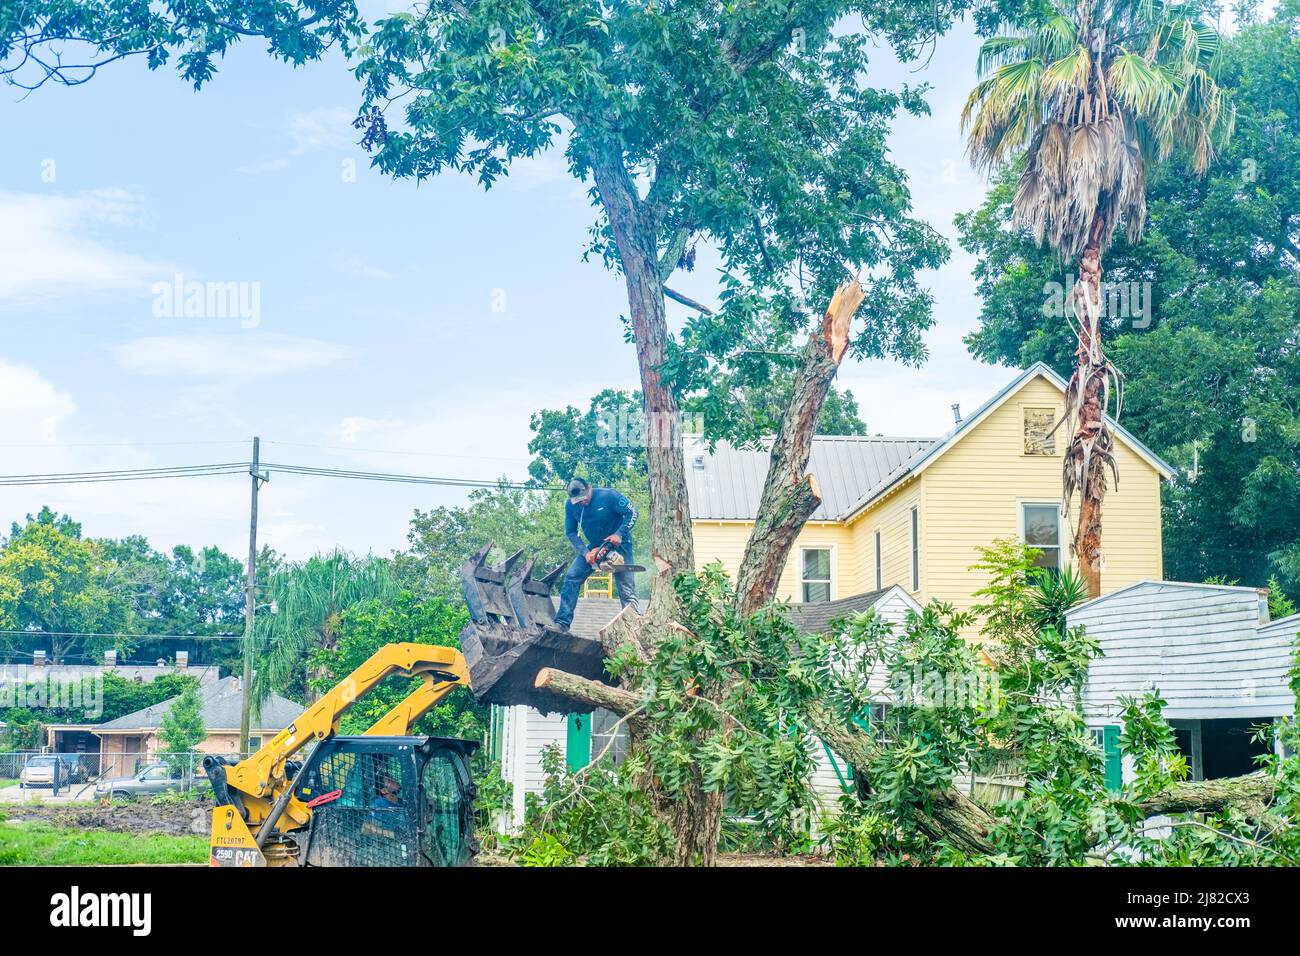 NEW ORLEANS, LA, USA - JULY 29, 2020: Worker standing on front end loader cutting down pecan tree with chainsaw in Uptown neighborhood Stock Photo